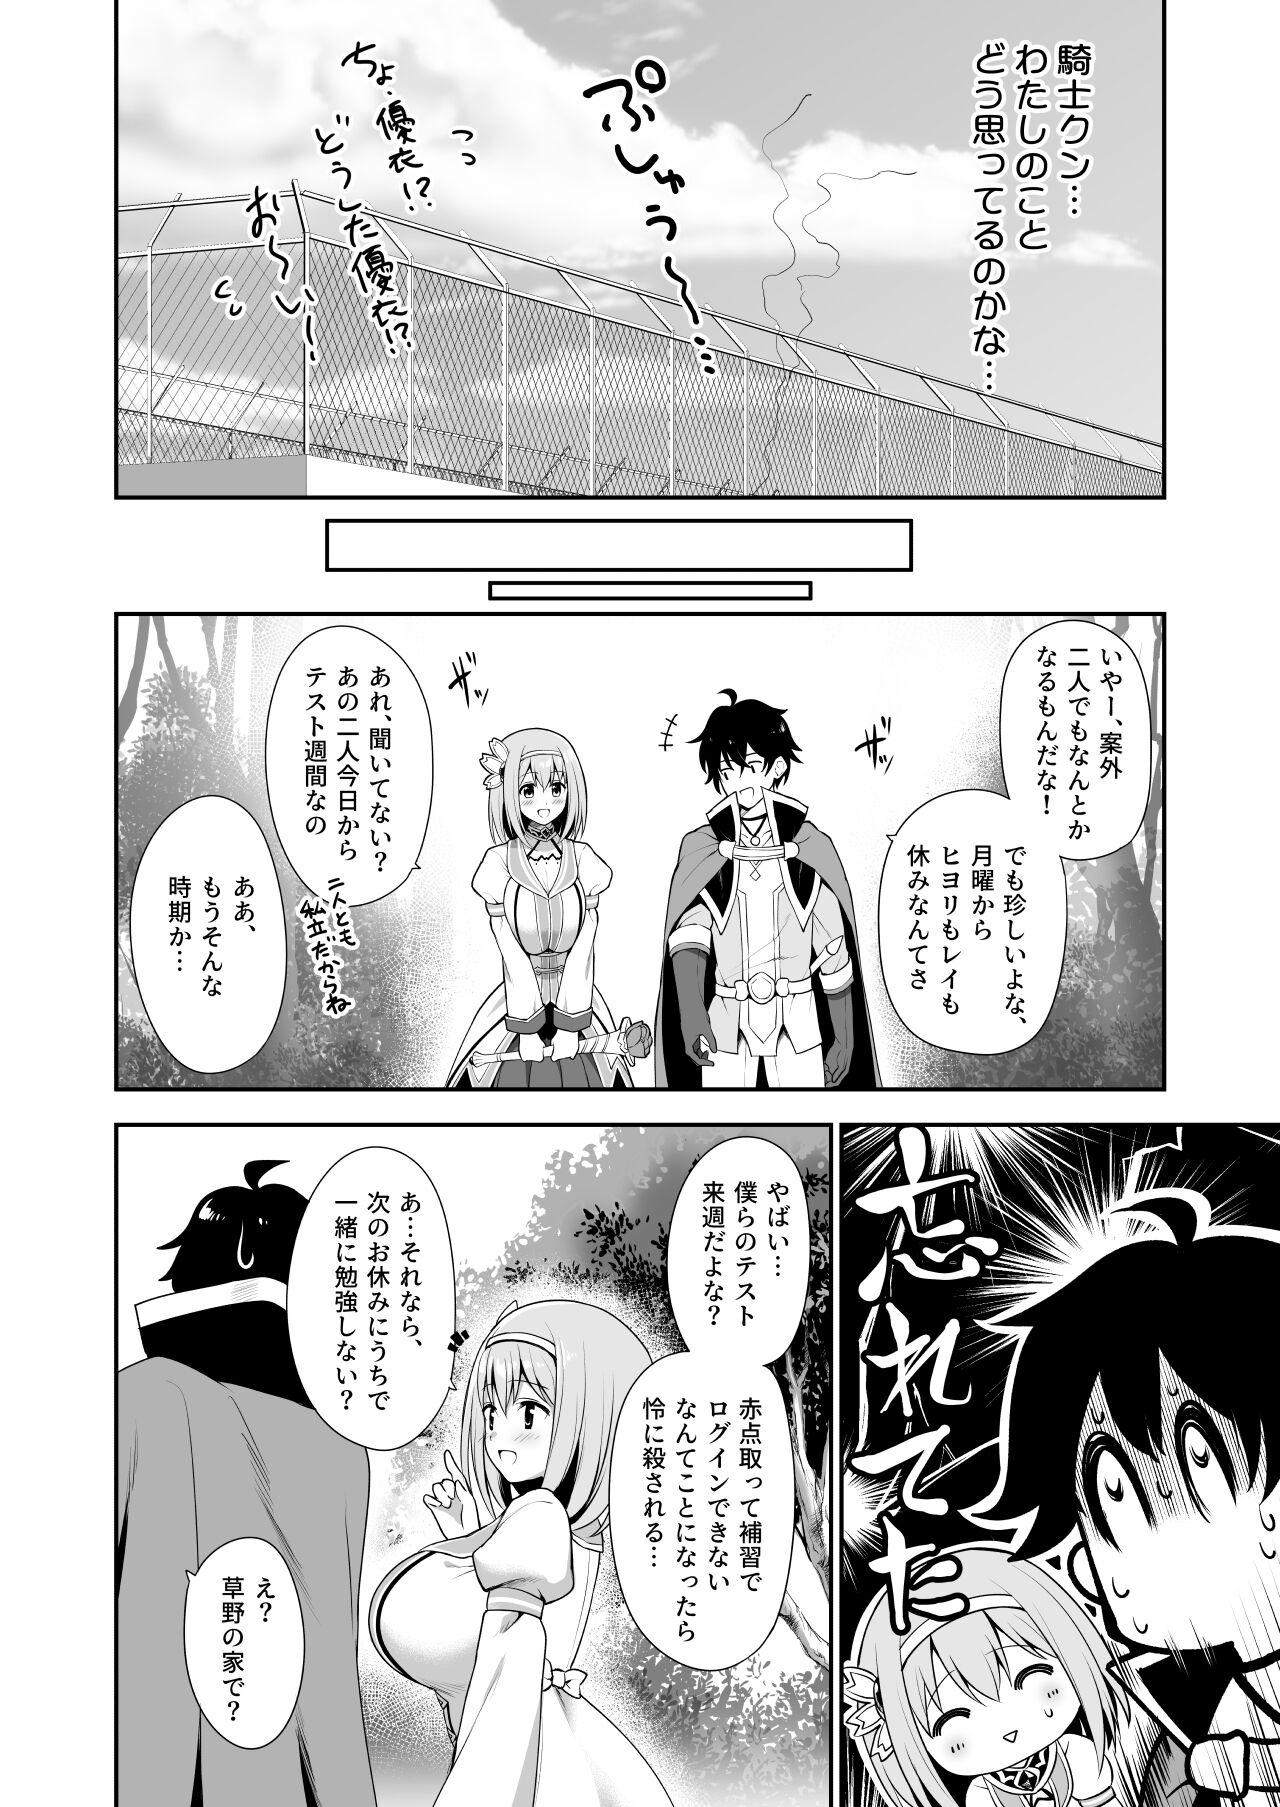 The 優衣コネ - Princess connect Spa - Page 8